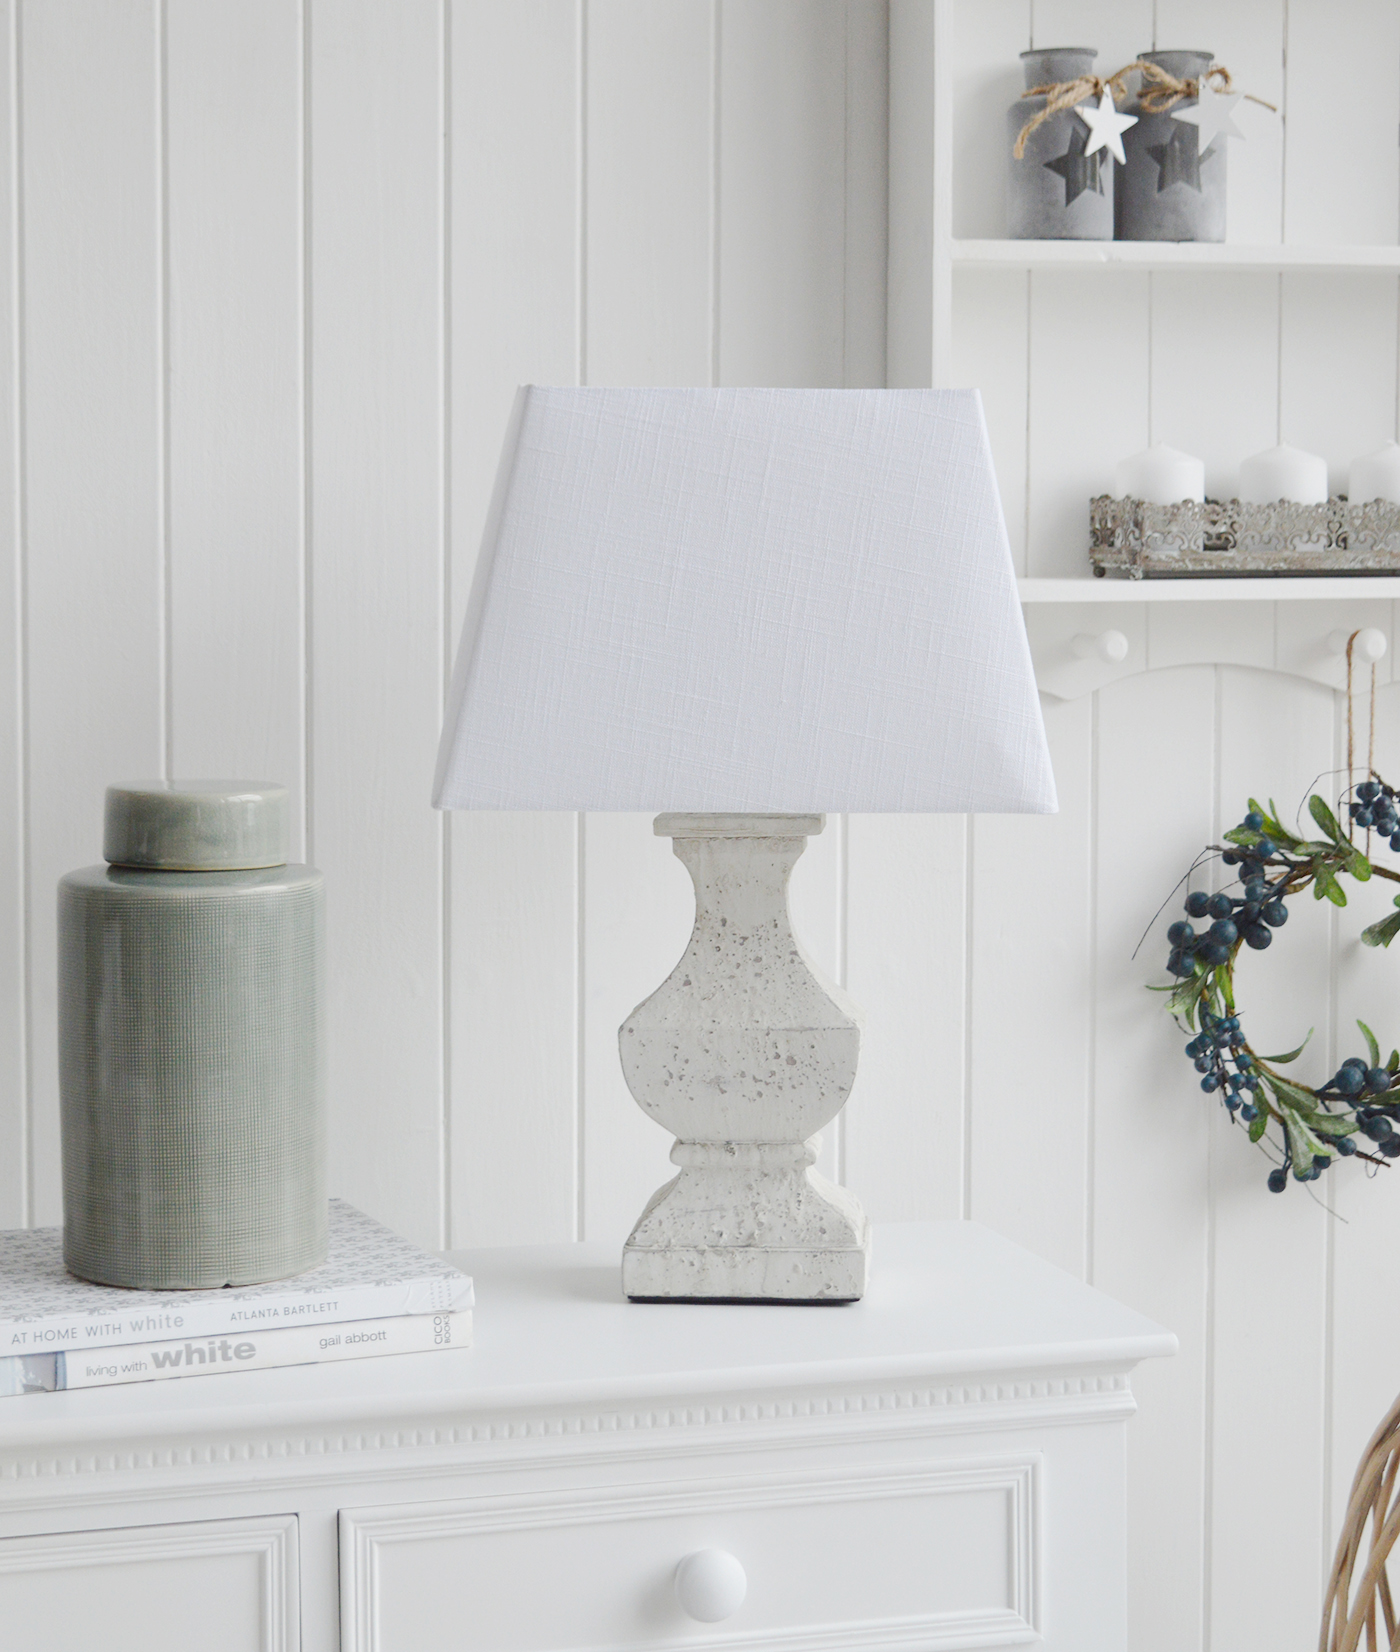 Hartford rustic grey table lamp from The White Lighthouse Furniture. A lovely table lamp for bedside table or living room. New England furniture and interiors for coastal, country and city homes